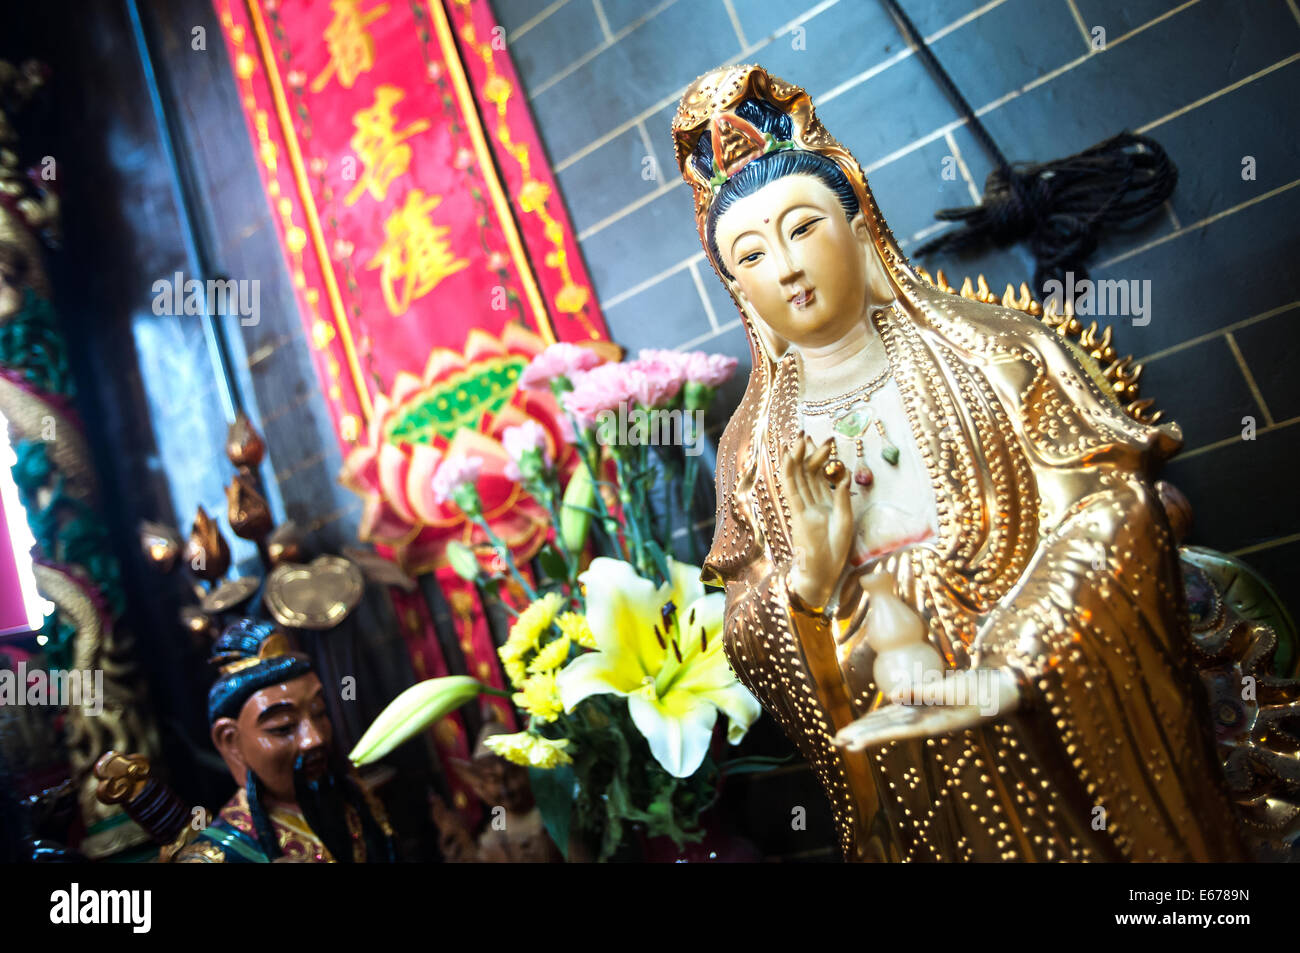 Statue of Guanyin, the Goddess of Mercy, at a Hong Kong temple Stock Photo